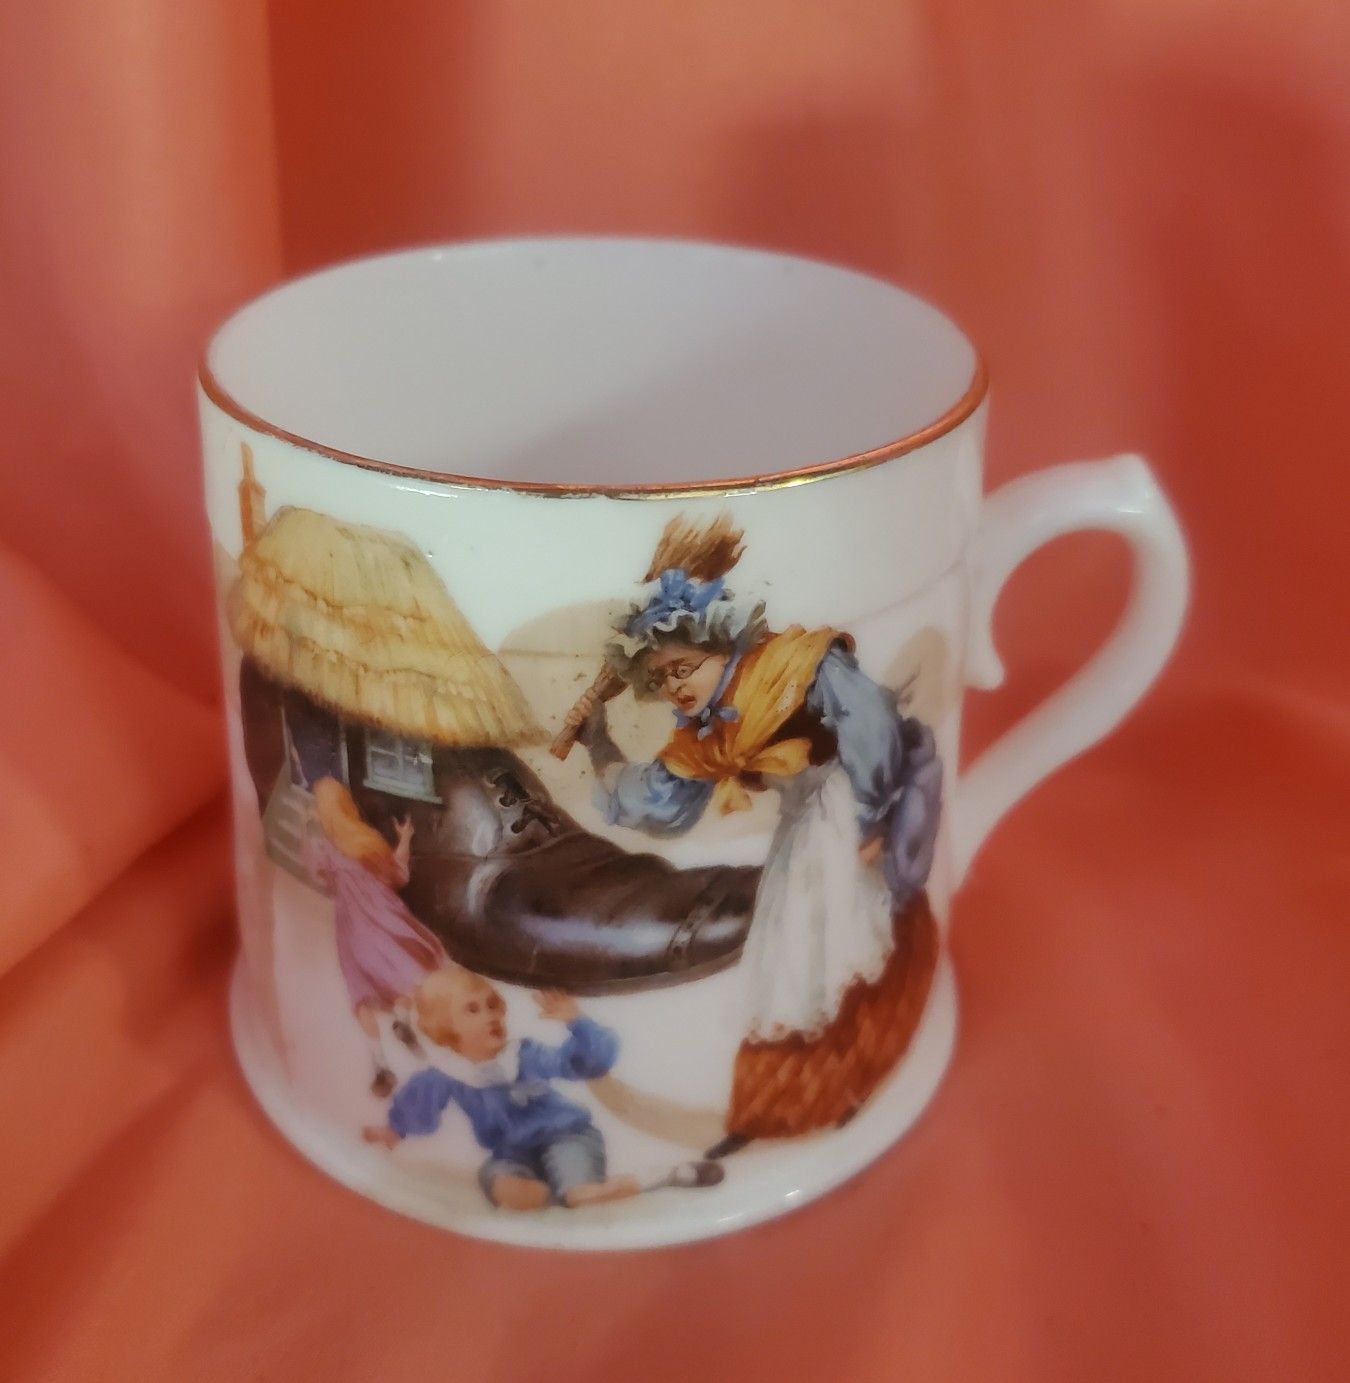 Royal Doulton Nursery Rhyme Mug, "Old Woman Who Lived in a Shoe" Rare!